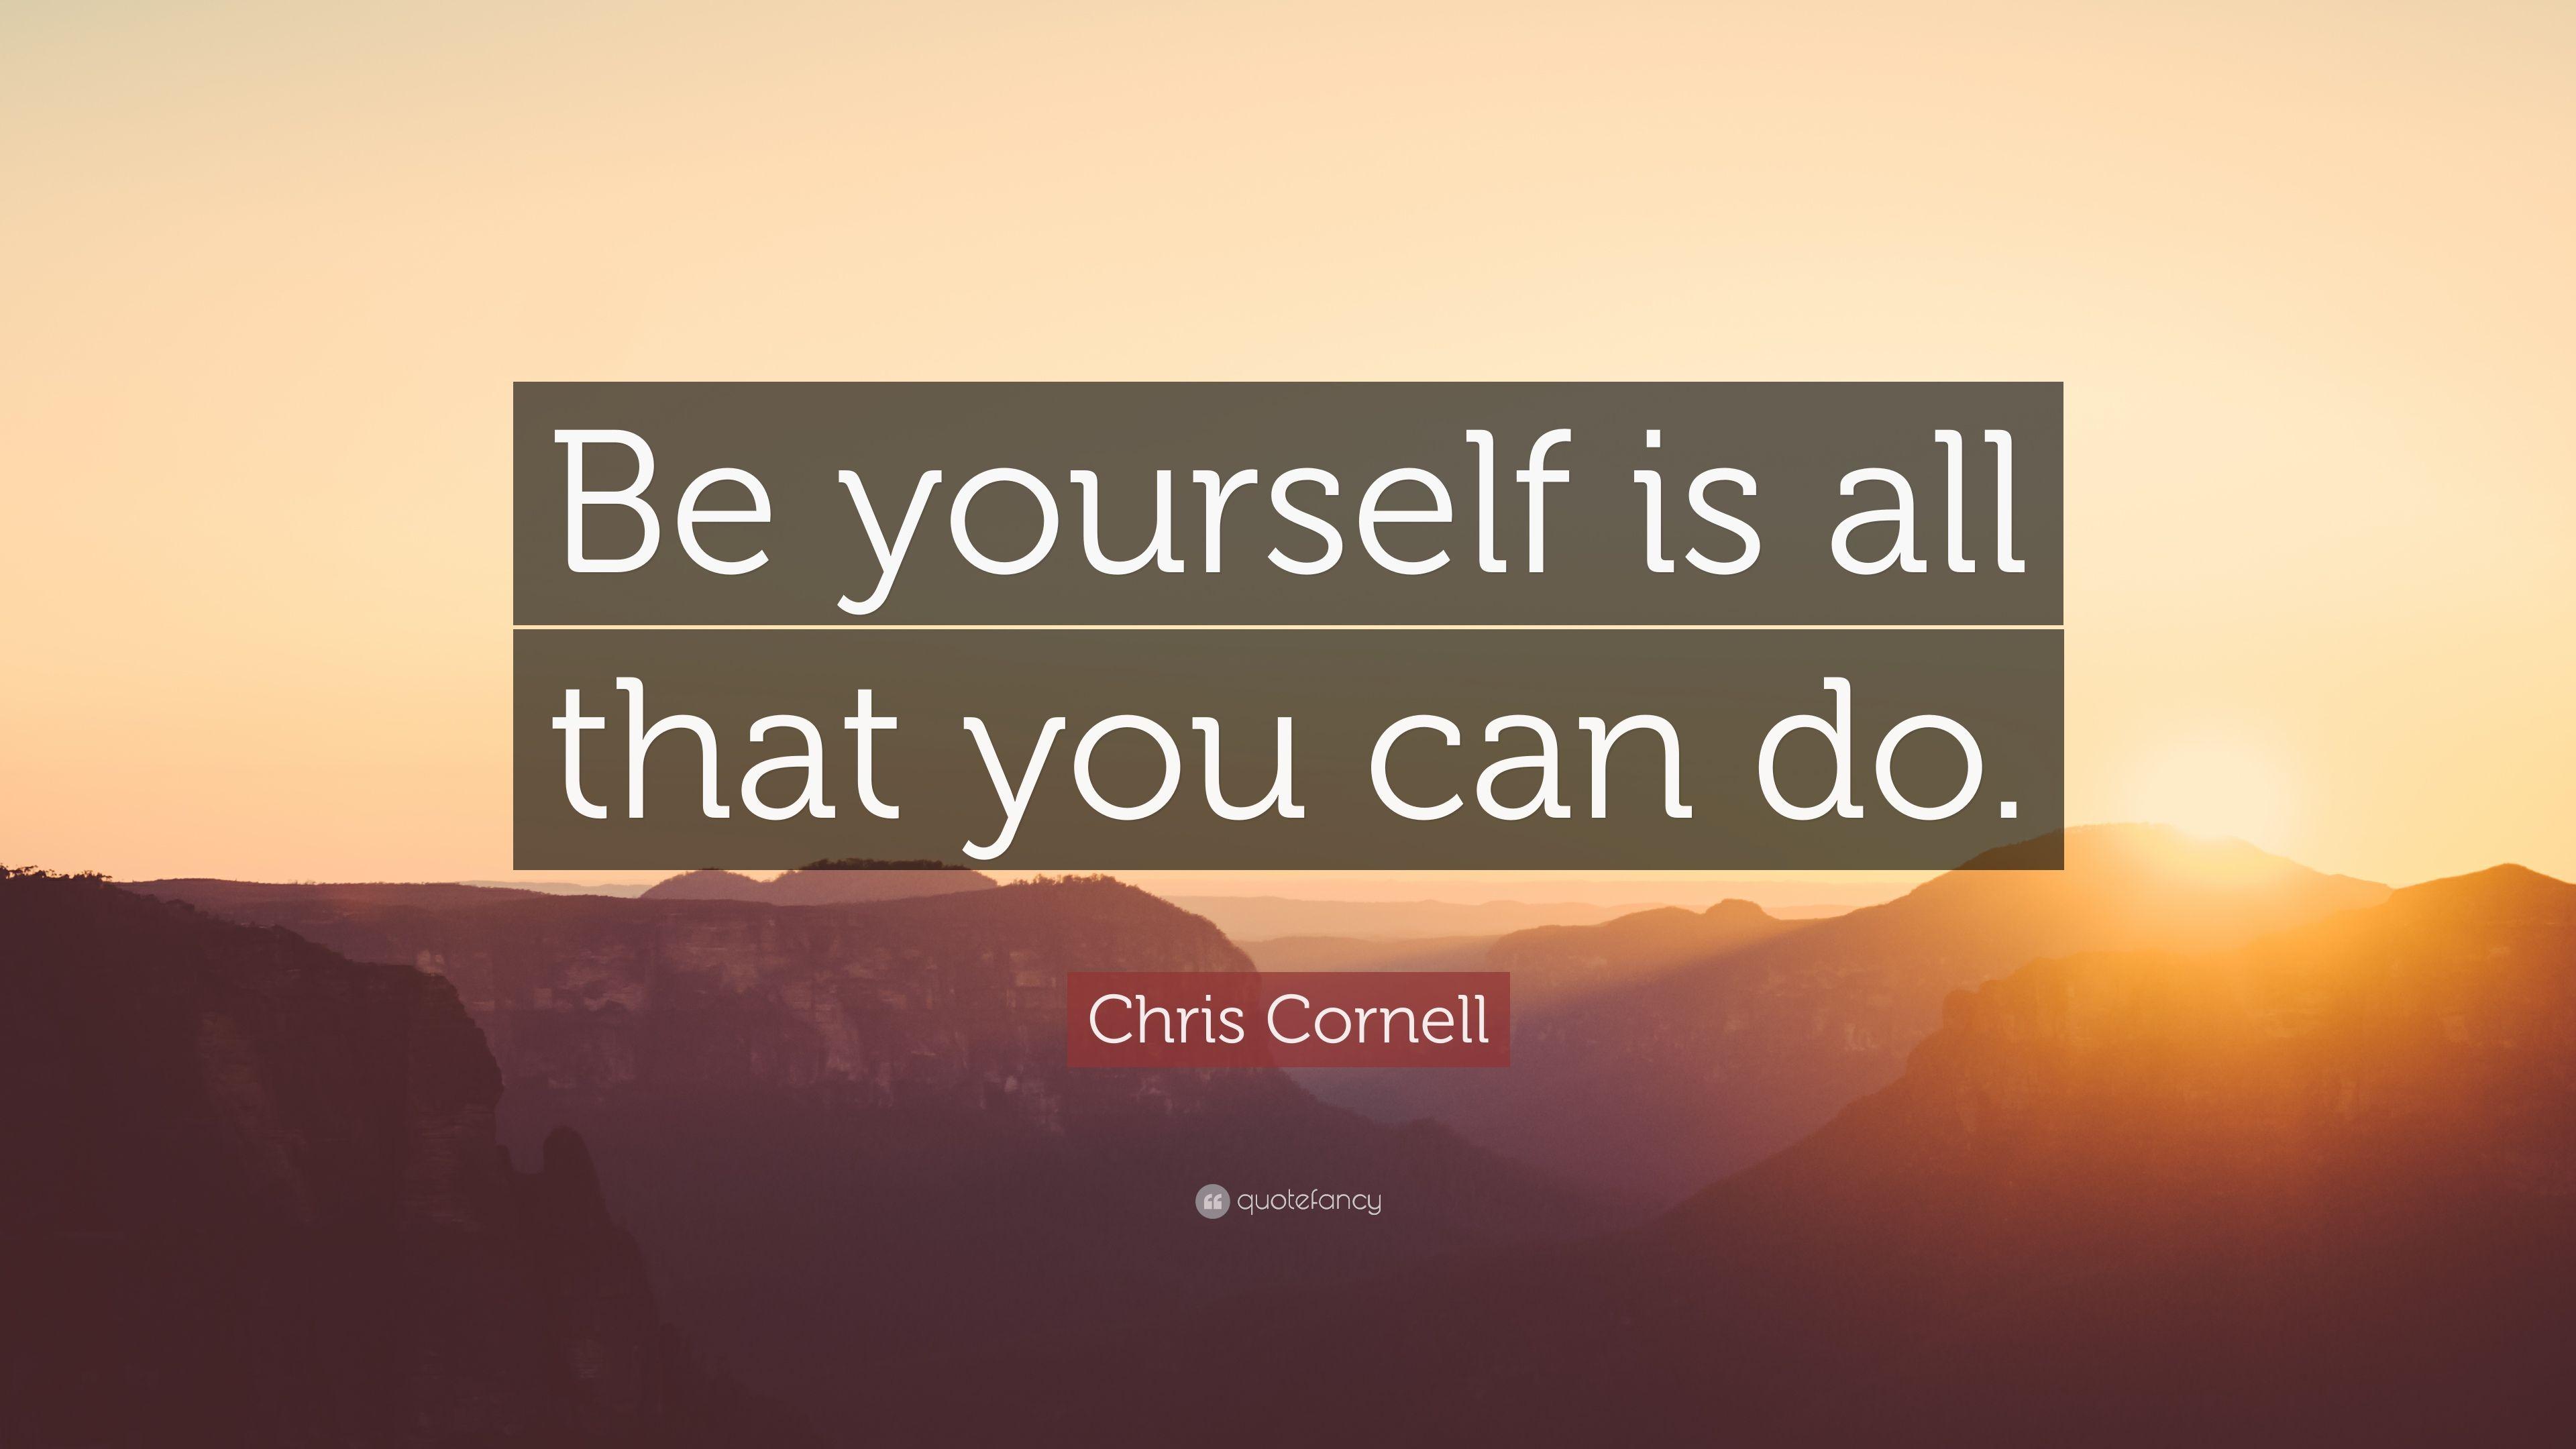 Chris Cornell Quote: “Be yourself is all that you can do.” 12